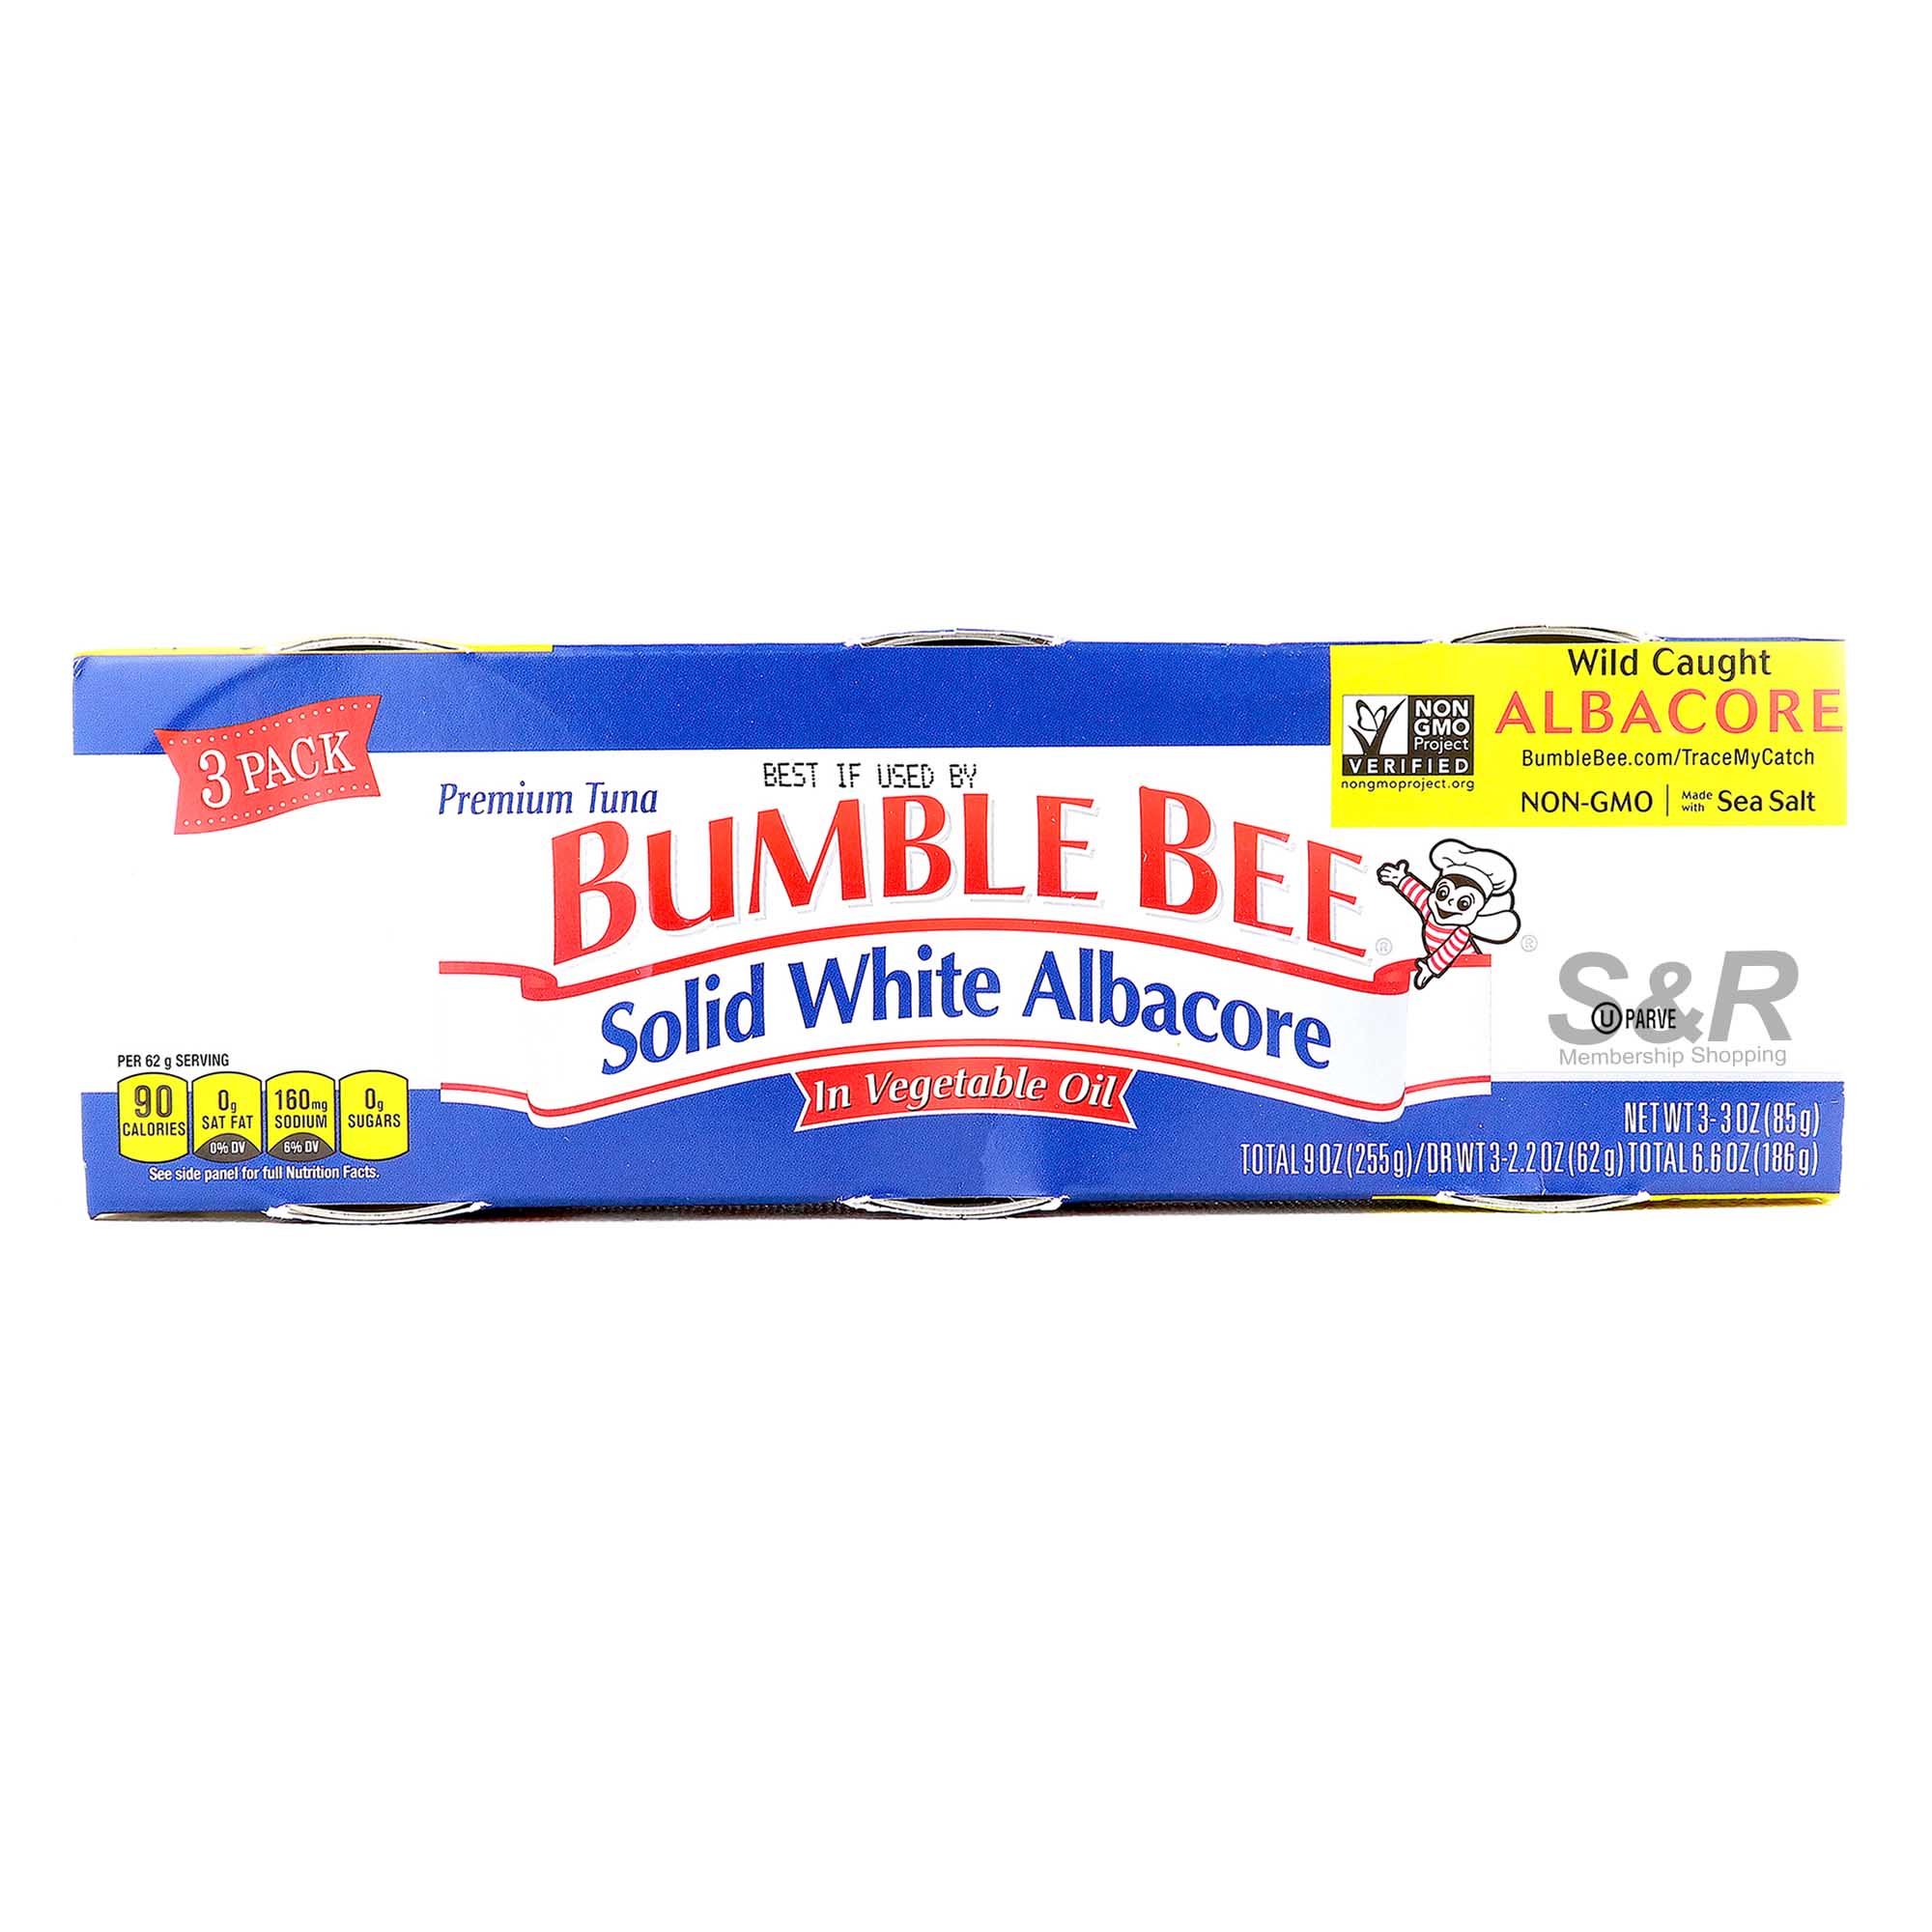 Bumble Bee Solid White Albacore Tuna in Vegetable Oil 3 cans